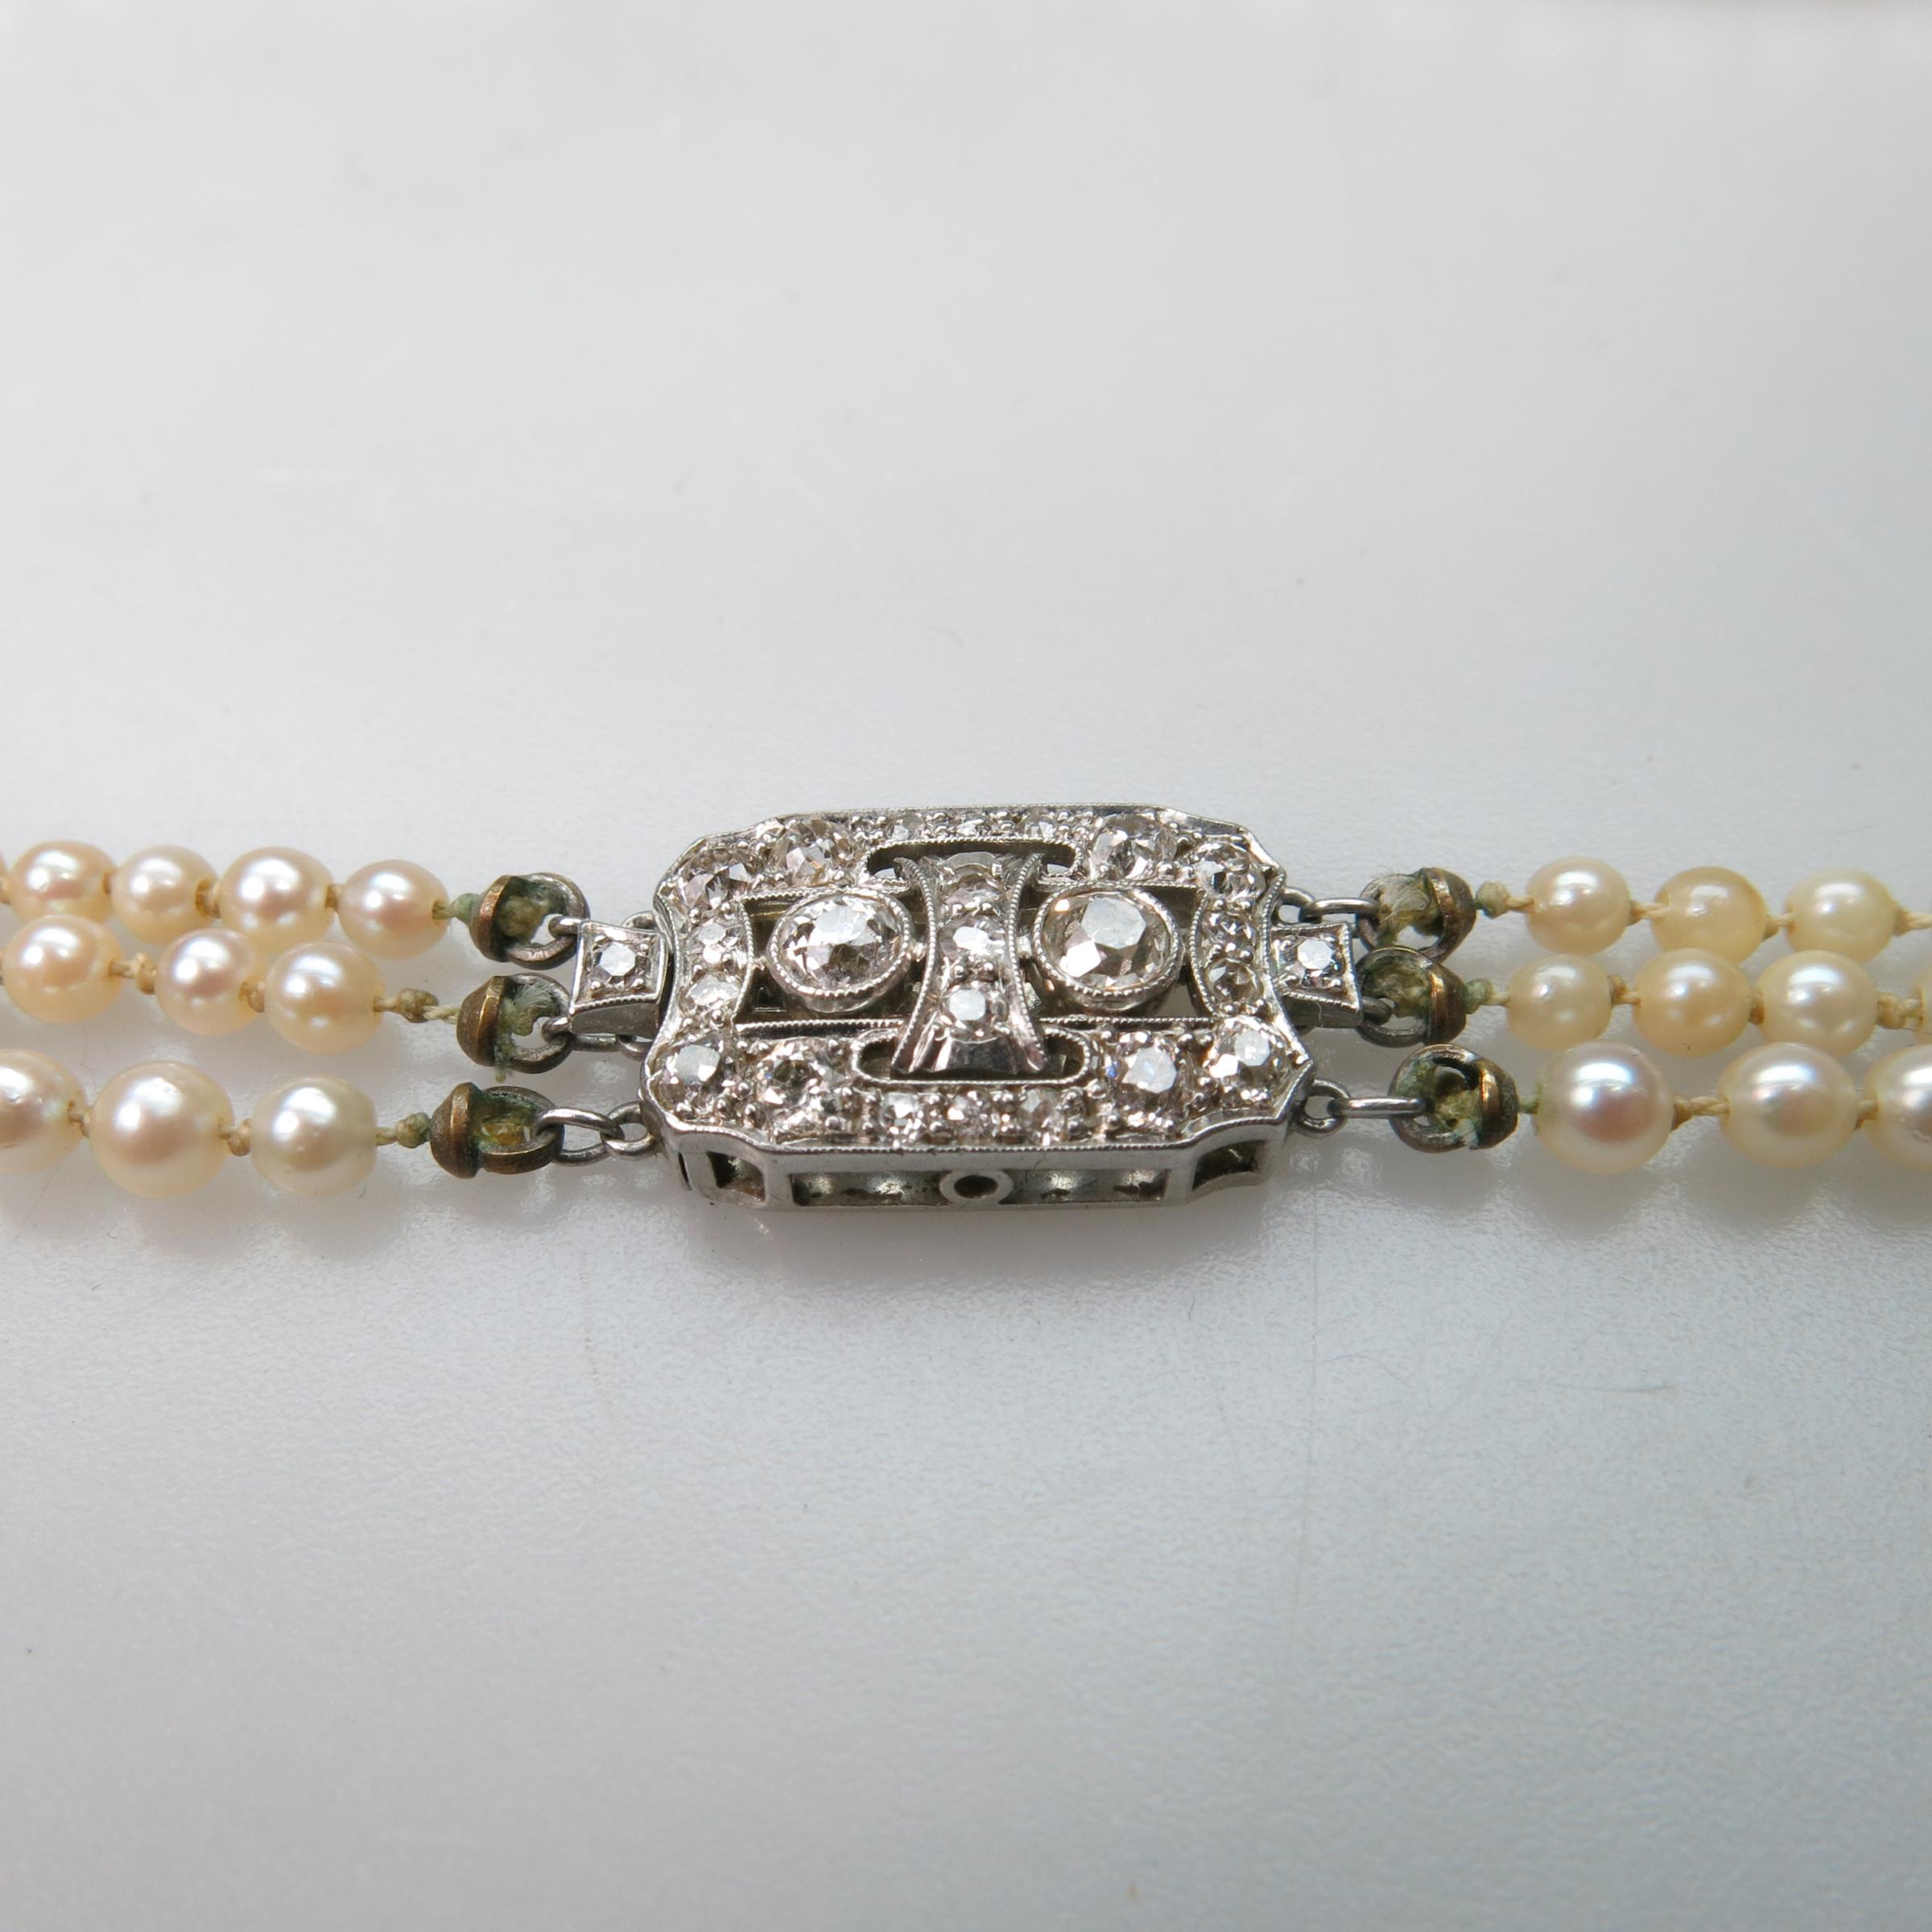 Triple Graduated Strand Of Cultured Pearls